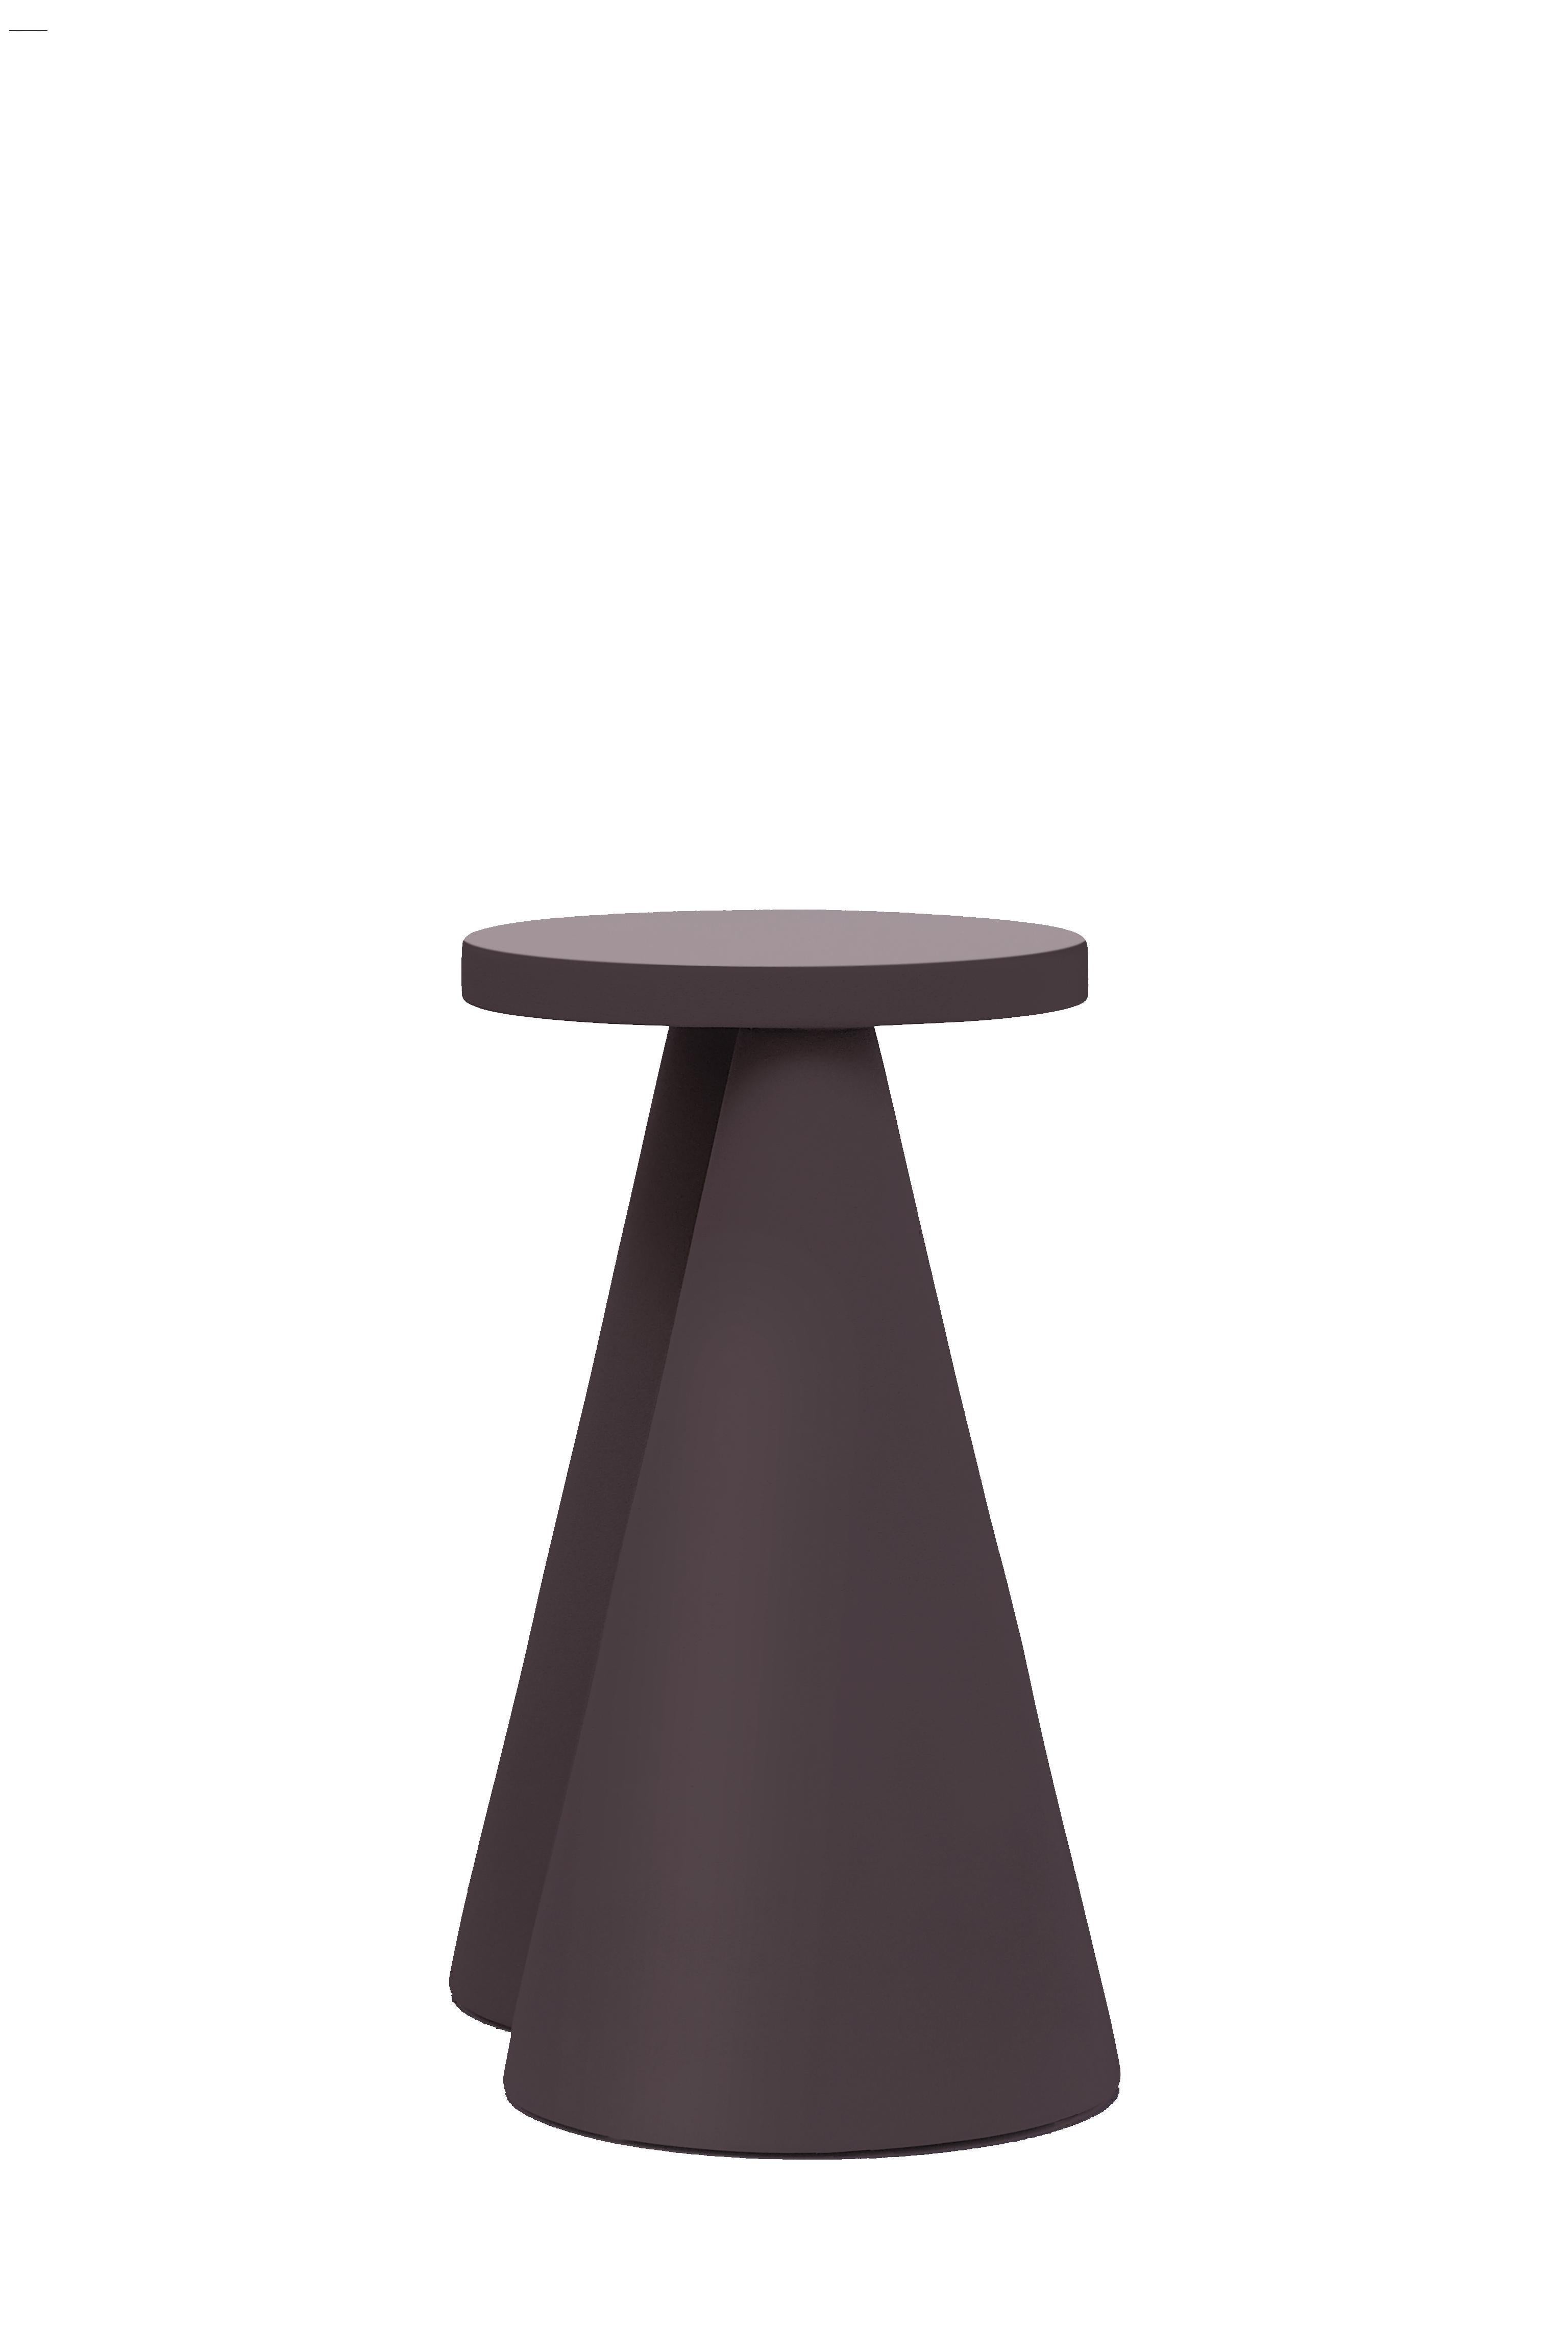 Italian Pair of Isola Side Table by Cara Davide